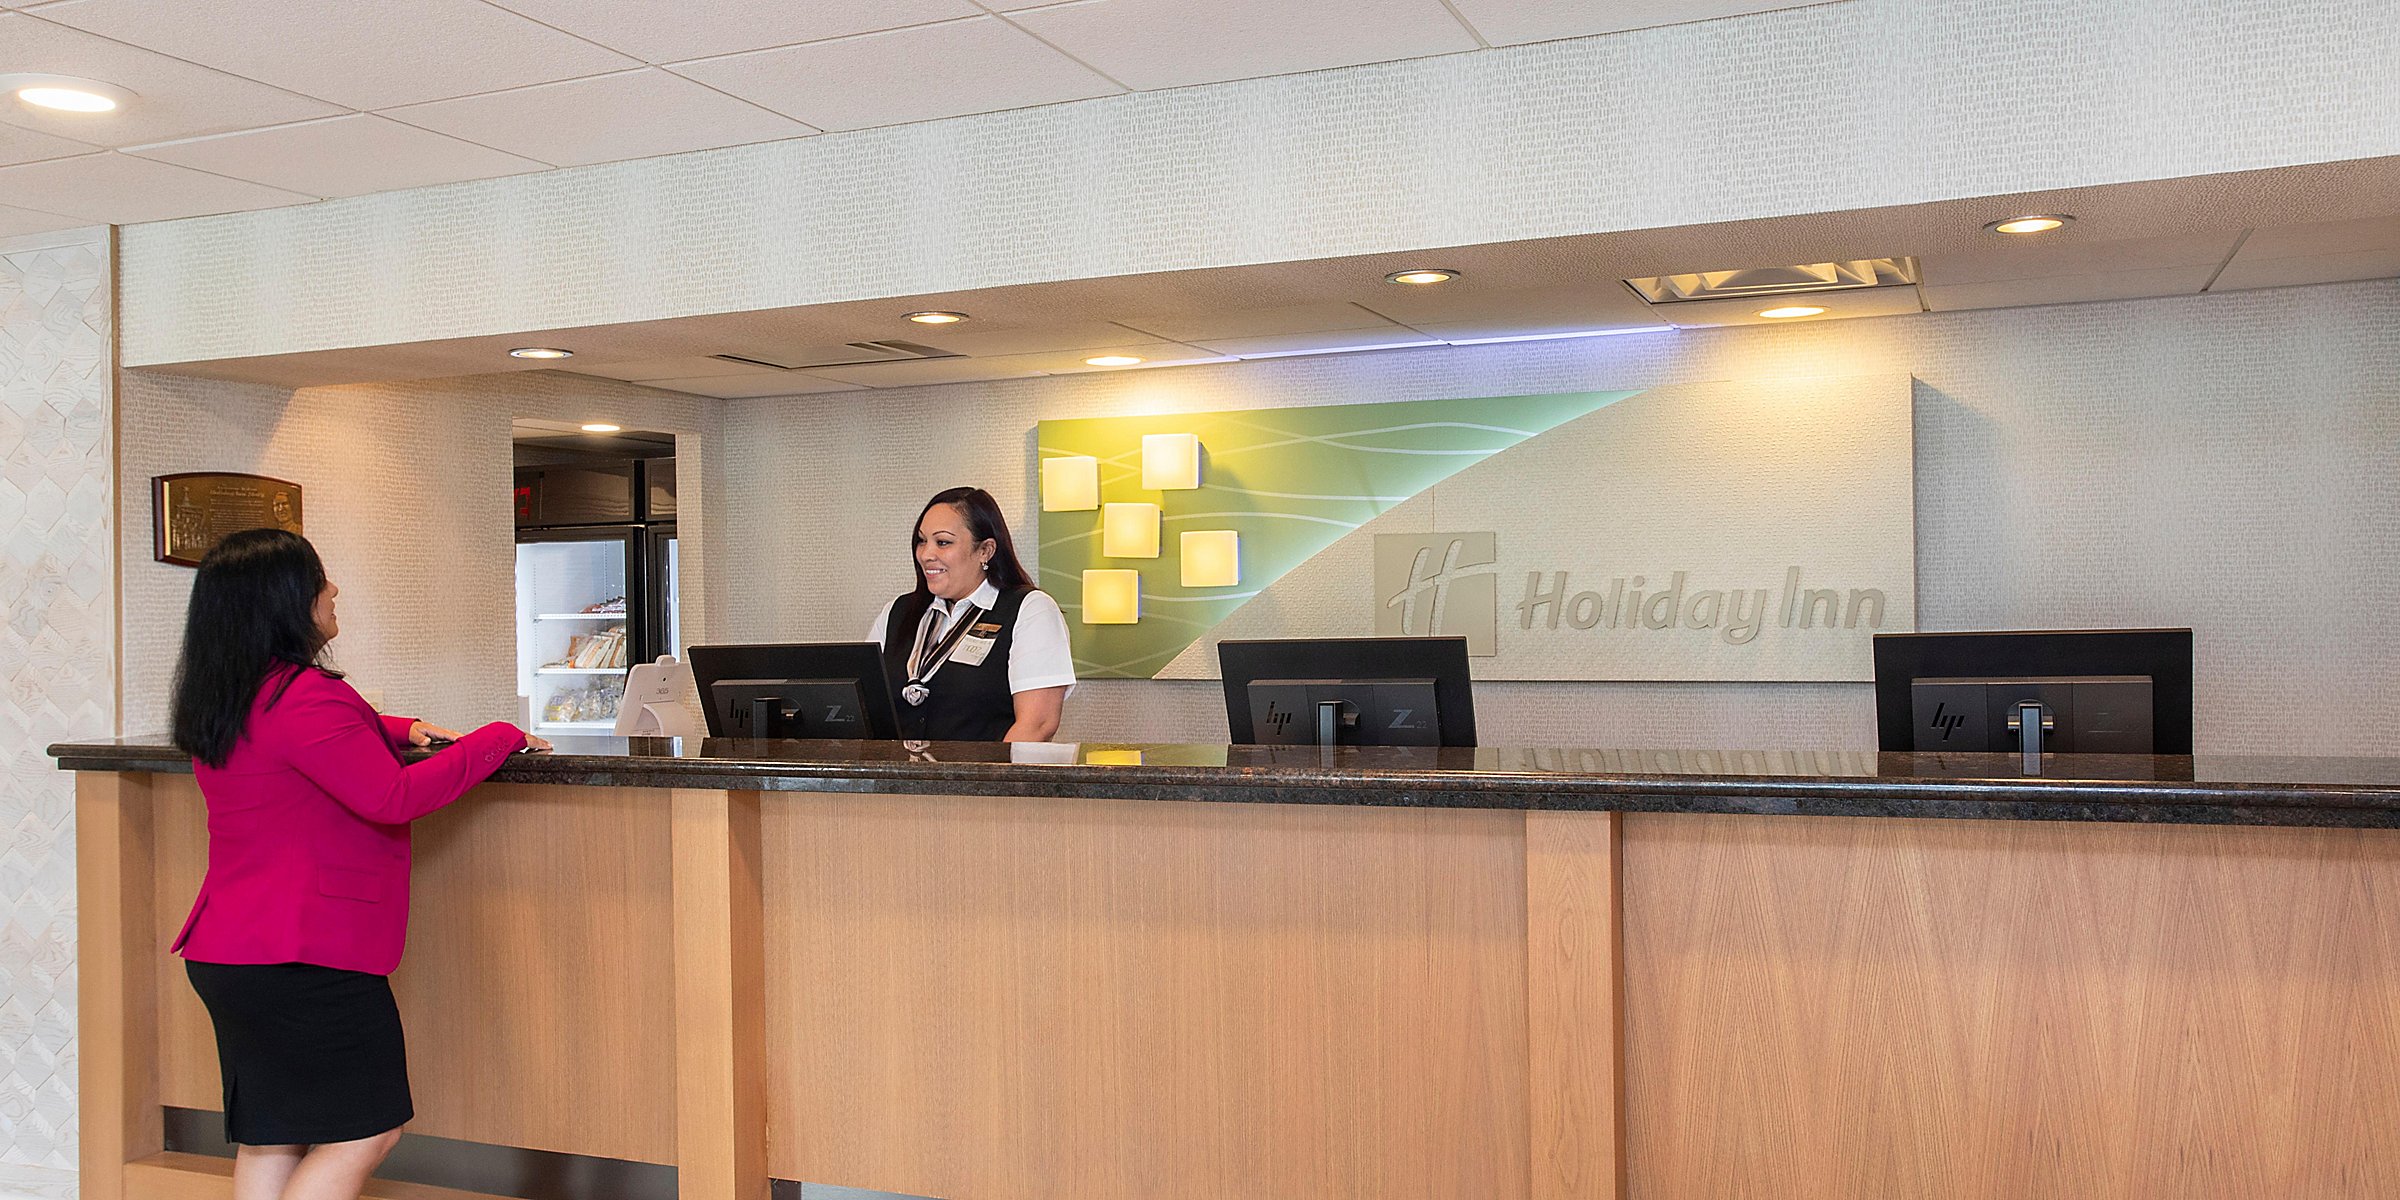 Parsippany Hotels In New Jersey Holiday Inn Suites Parsippany